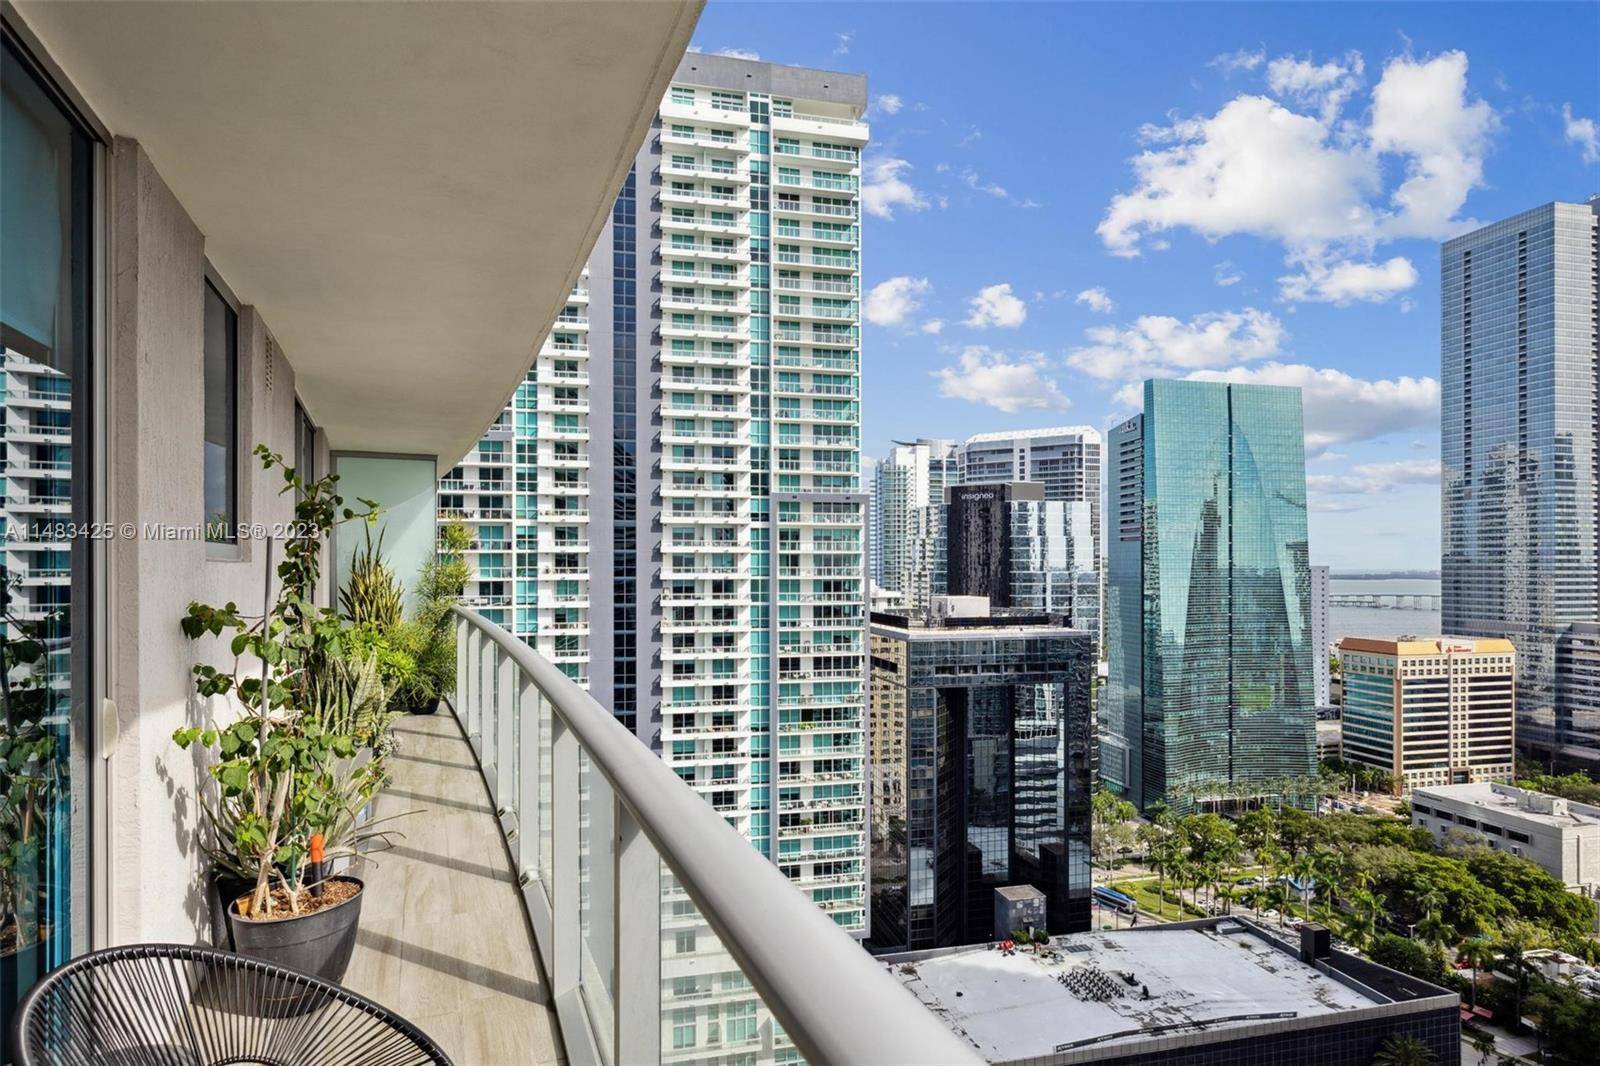 Furnished Beautiful 2 bed 2 bath residence at Millecento offers the essence of luxury living in the vibrant Brickell neighborhood.